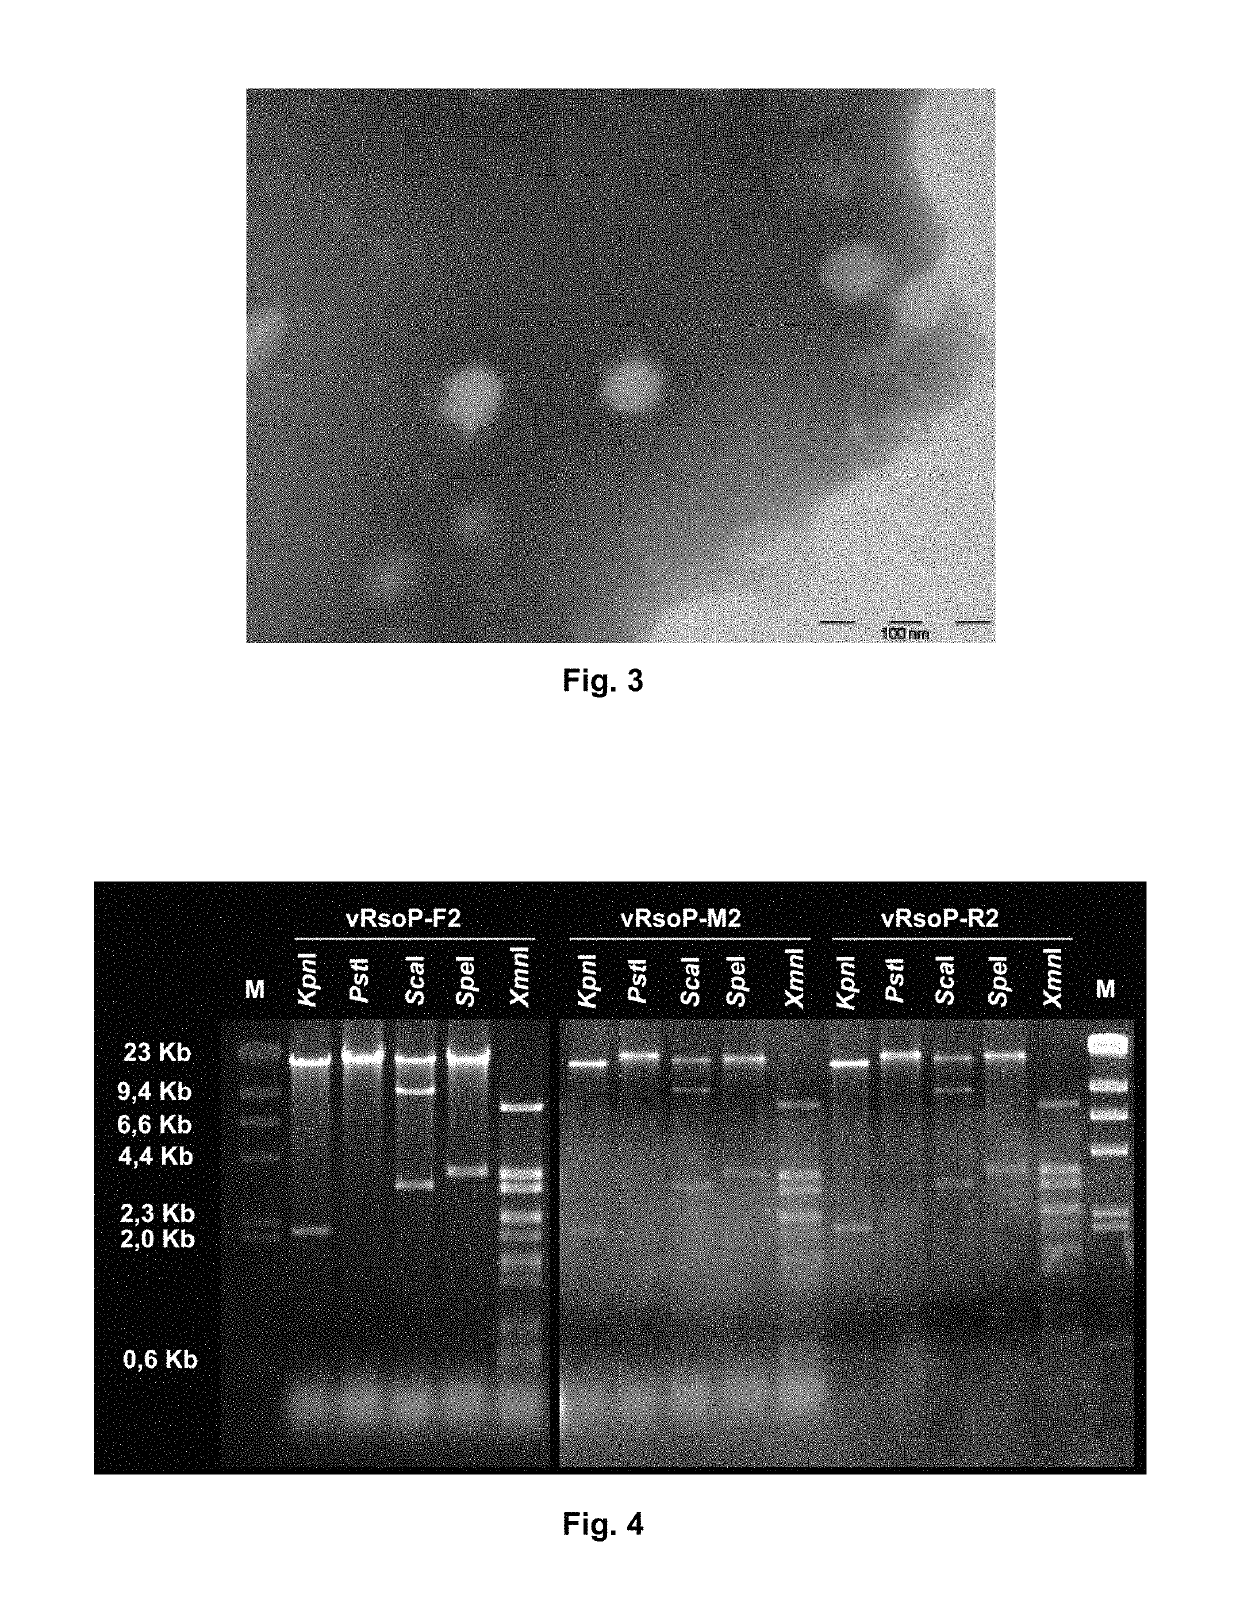 Method for the prevention and/or the biological control of bacterial wilt caused by <i>Ralstonia solanacearum</i>, via the use of bacteriophages suitable for this purpose and compositions thereof